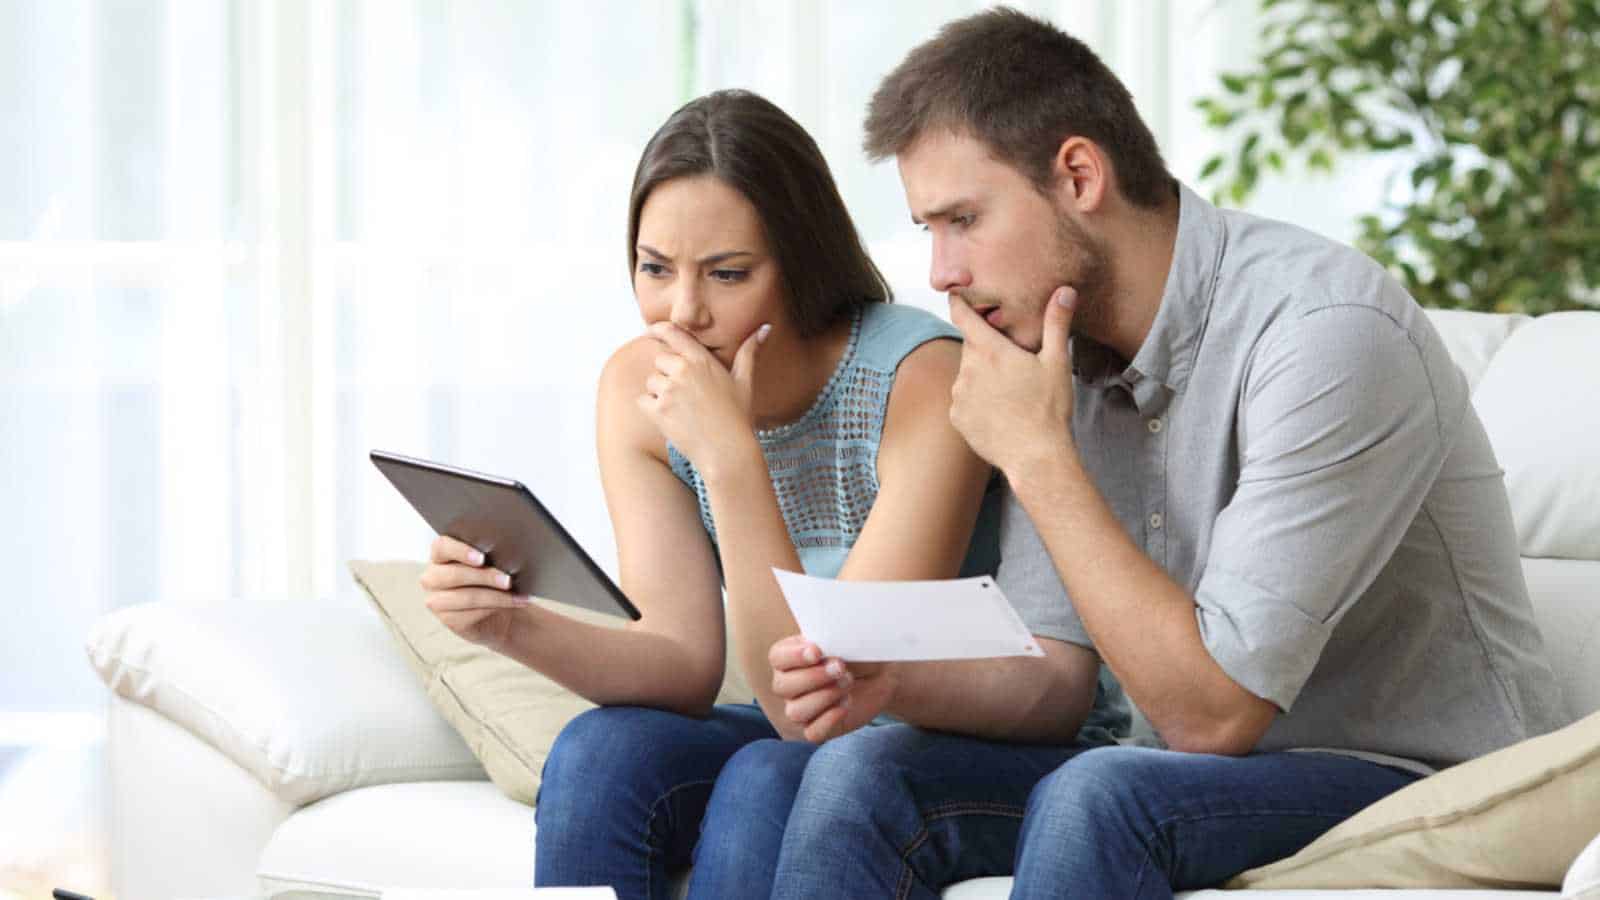 Stressed couples discussing tax